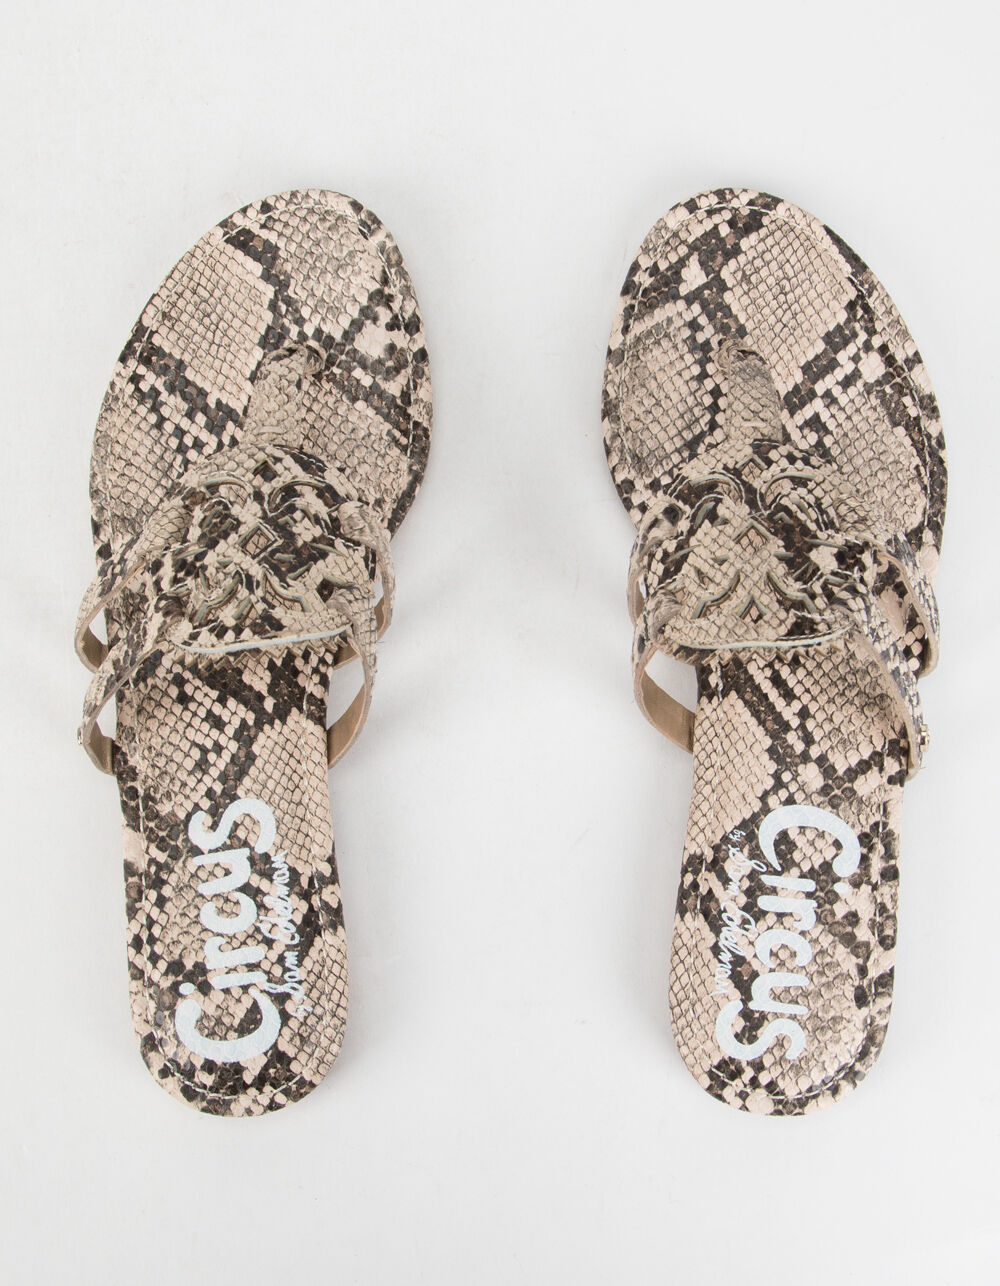 CIRCUS BY SAM EDELMAN Canyon Womens Snake Sandals - SNAKE | Tillys